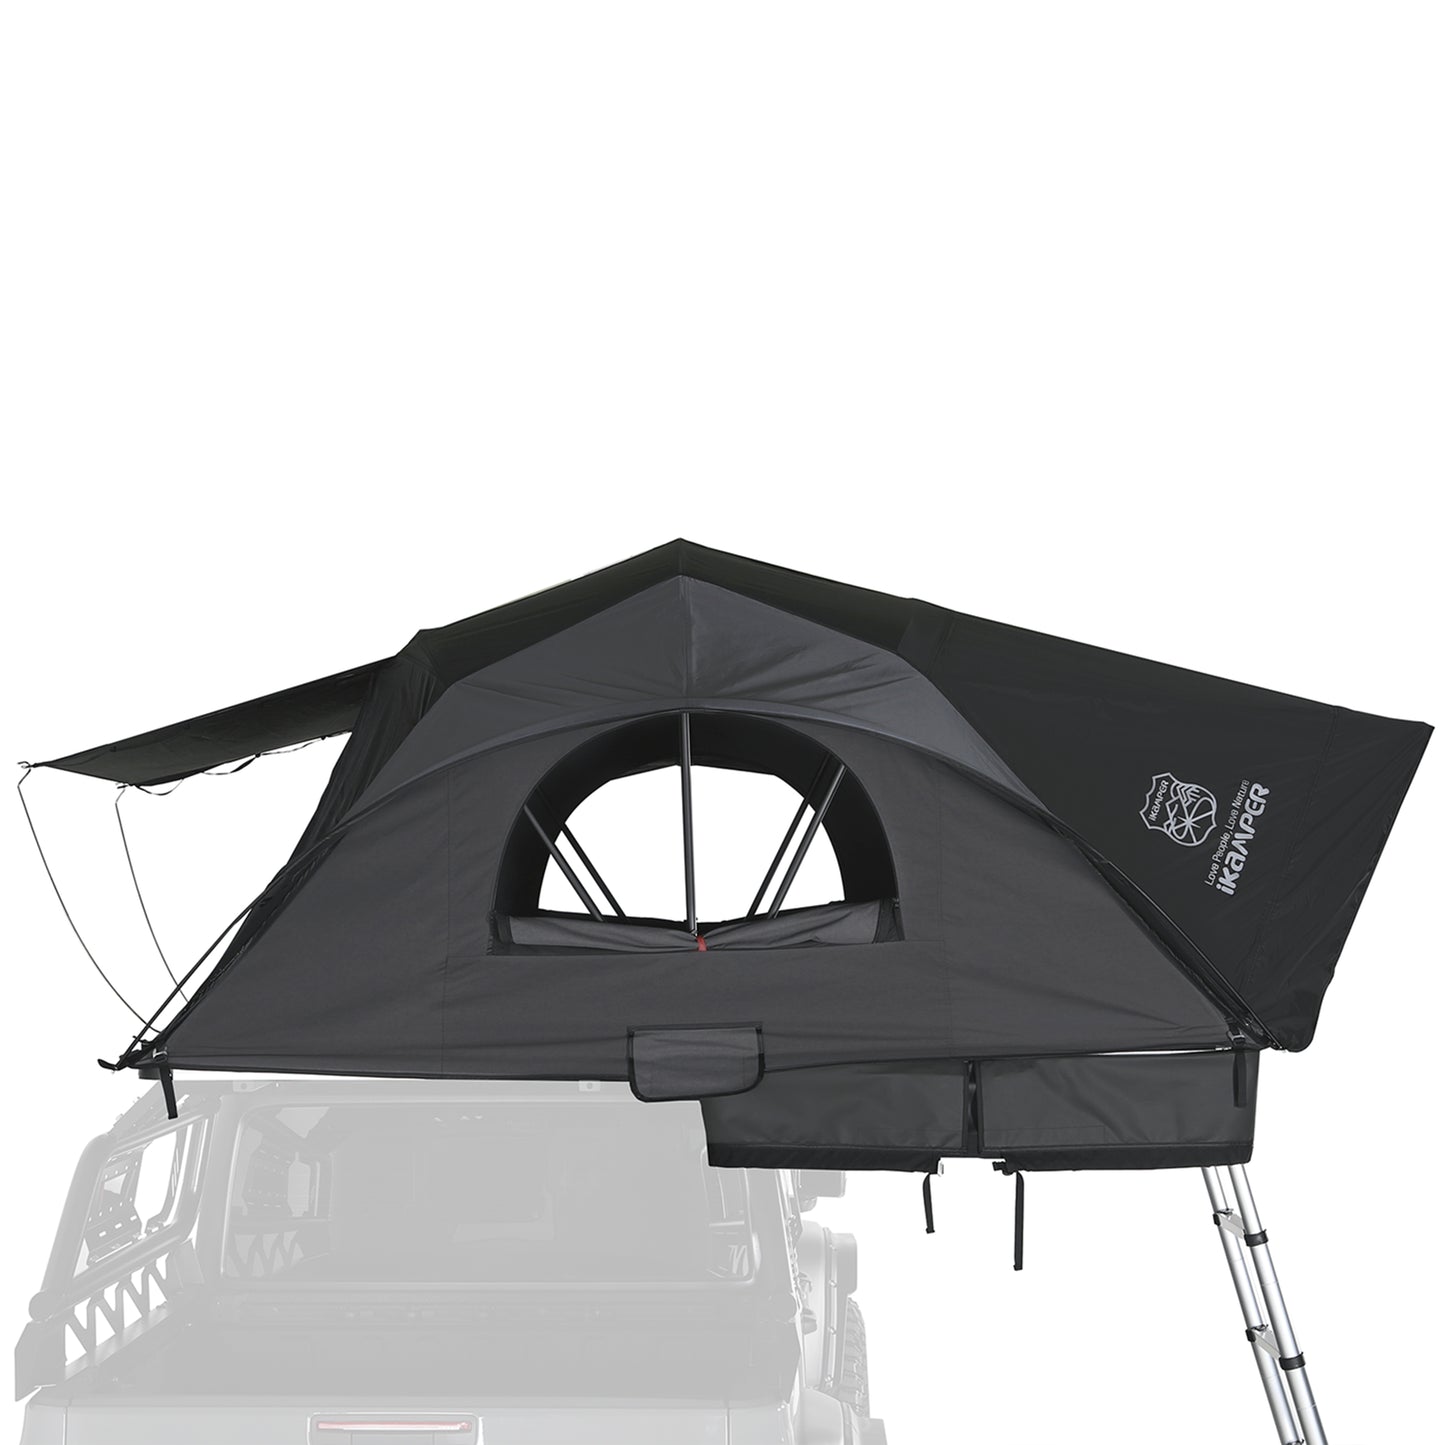 iKamper - X-Cover Insulation Tent